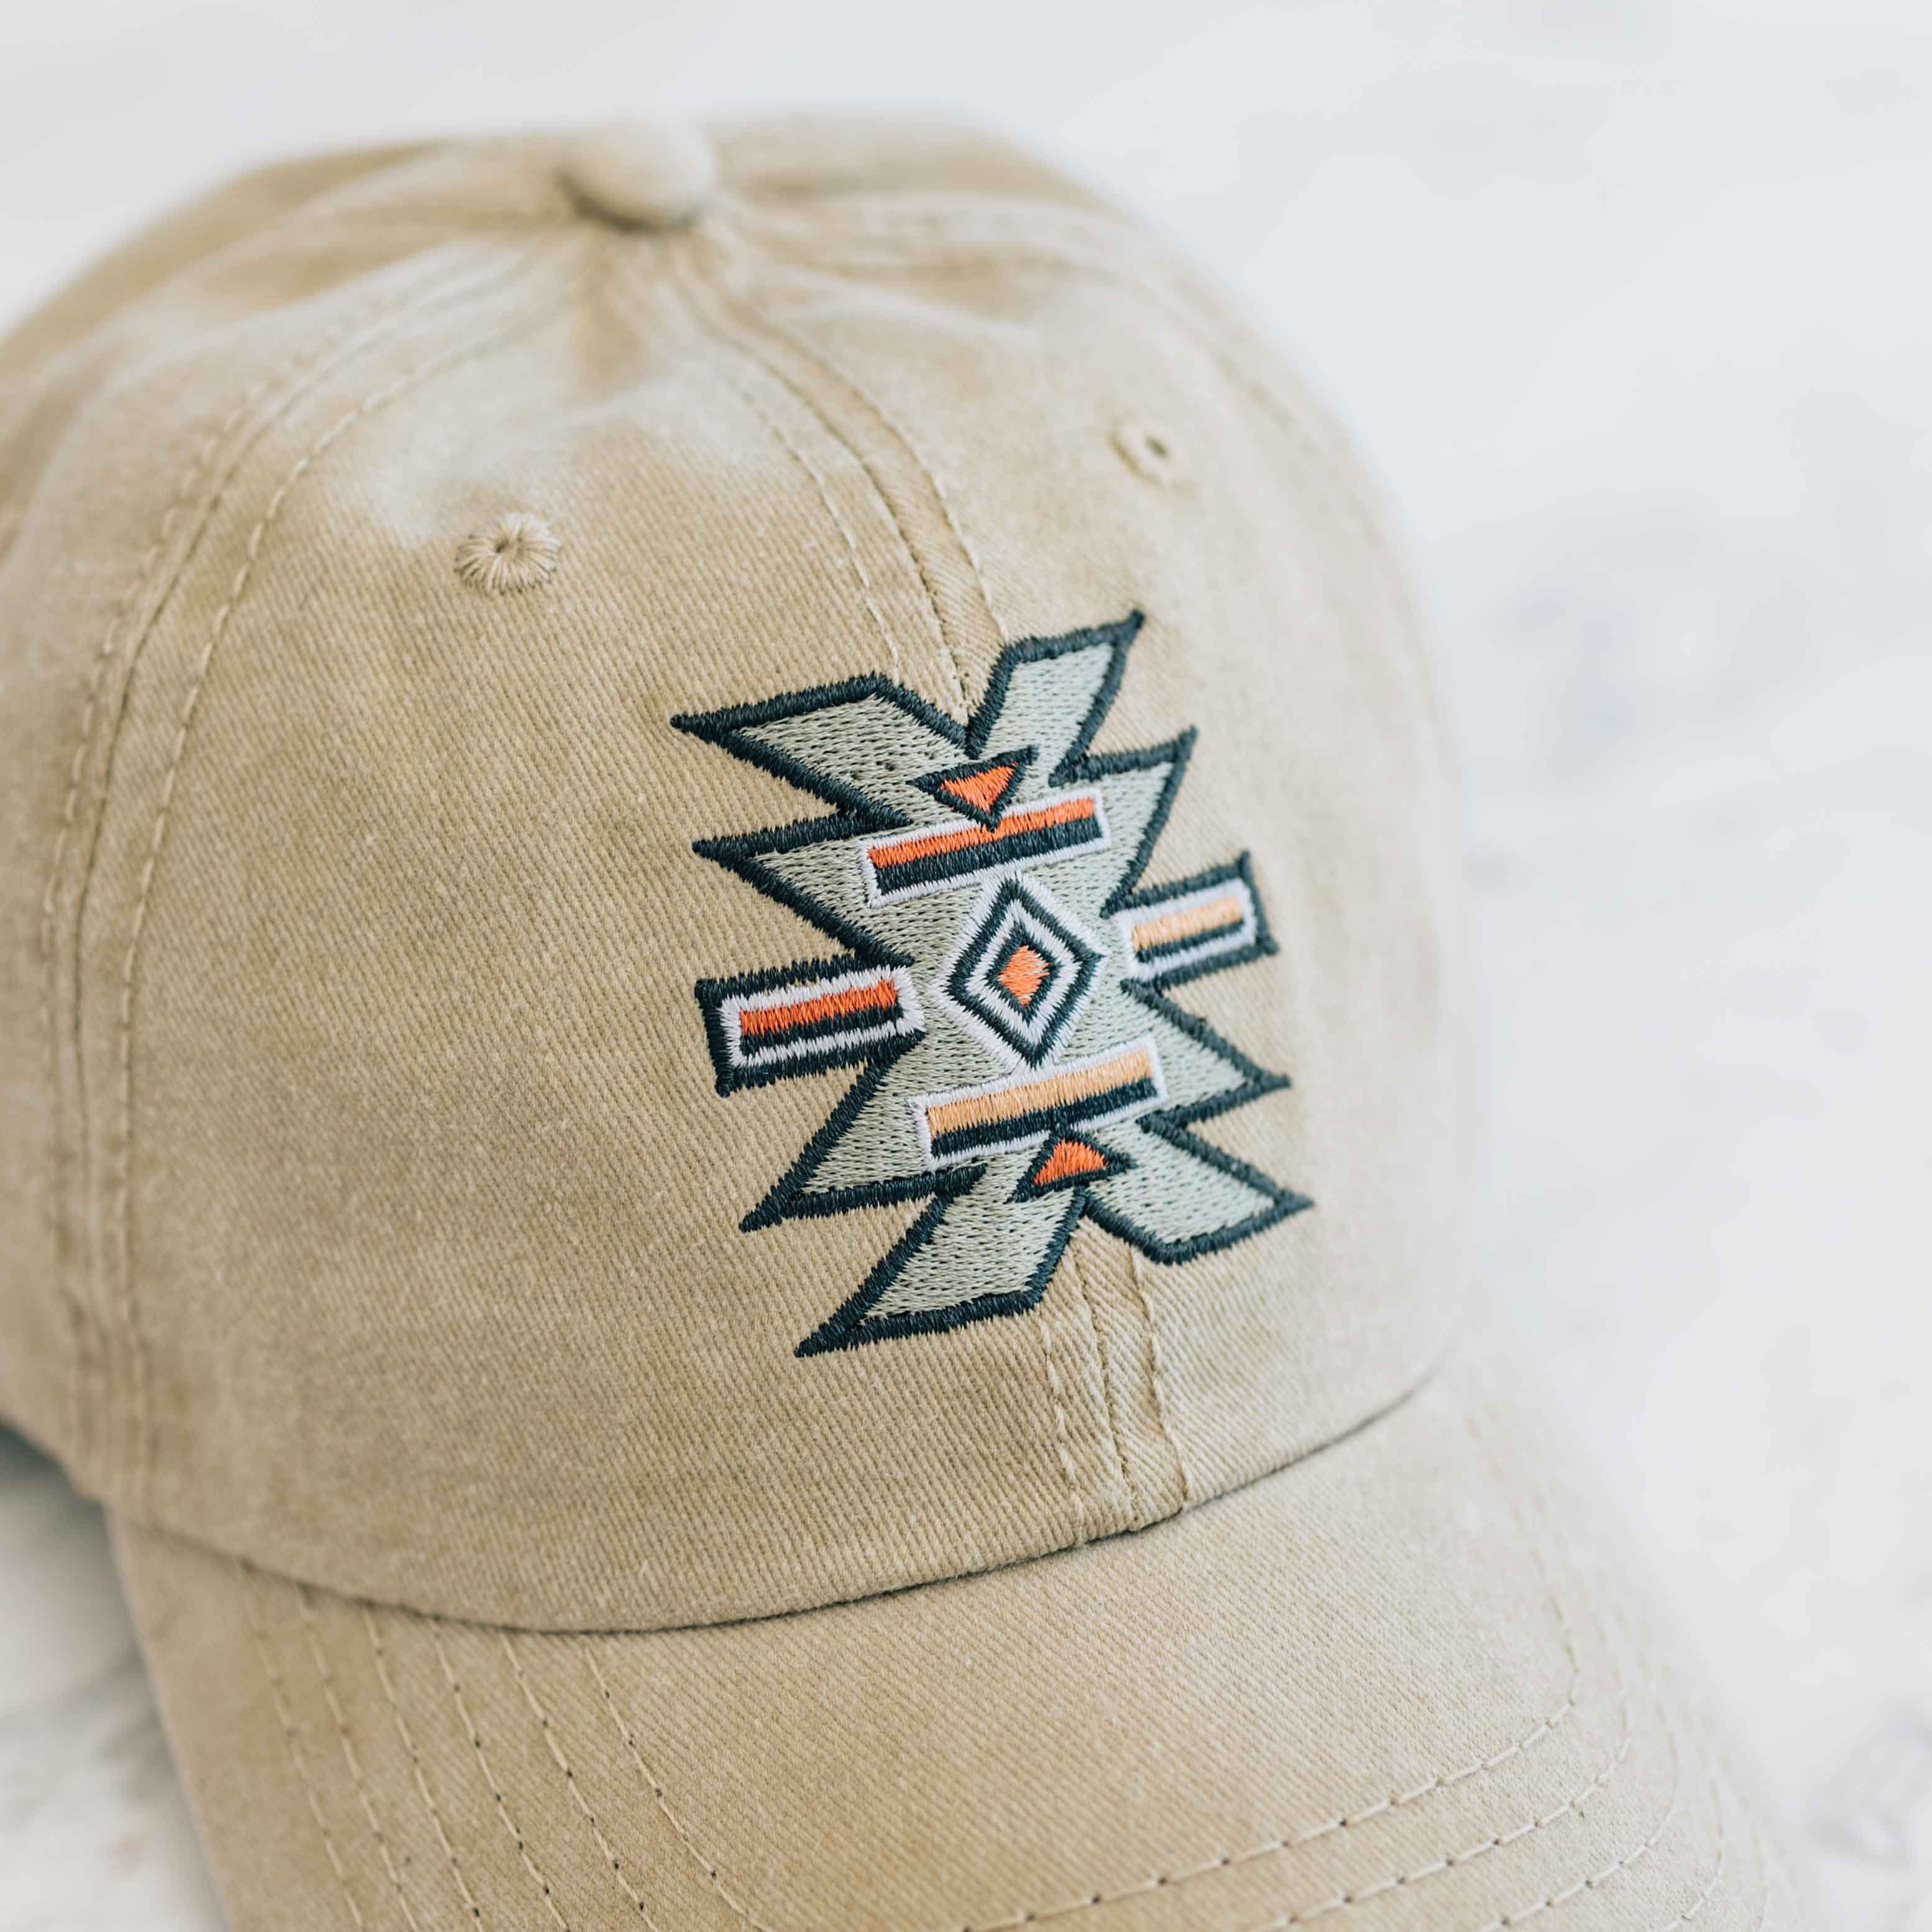 INANI • Stone Heritage Cap - Stokedthebrand. Lifestyle products for outdoor adventures. Made in South Africa